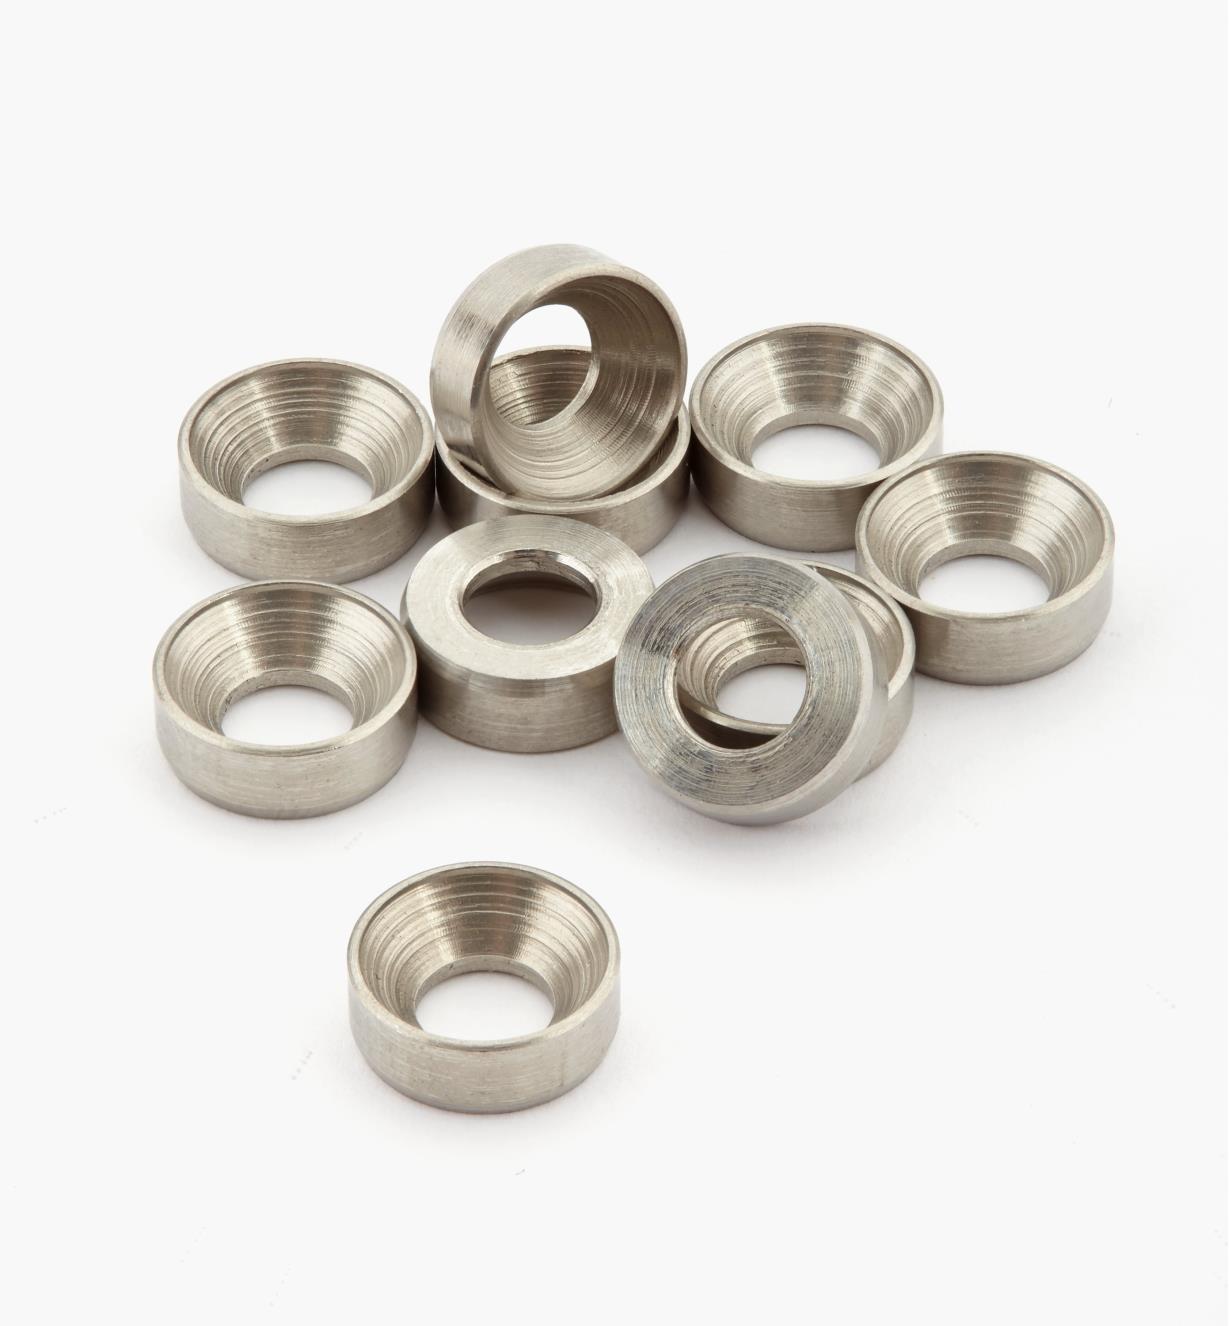 01K7053 - #10 Stainless-Steel Washers, pkg. of 10